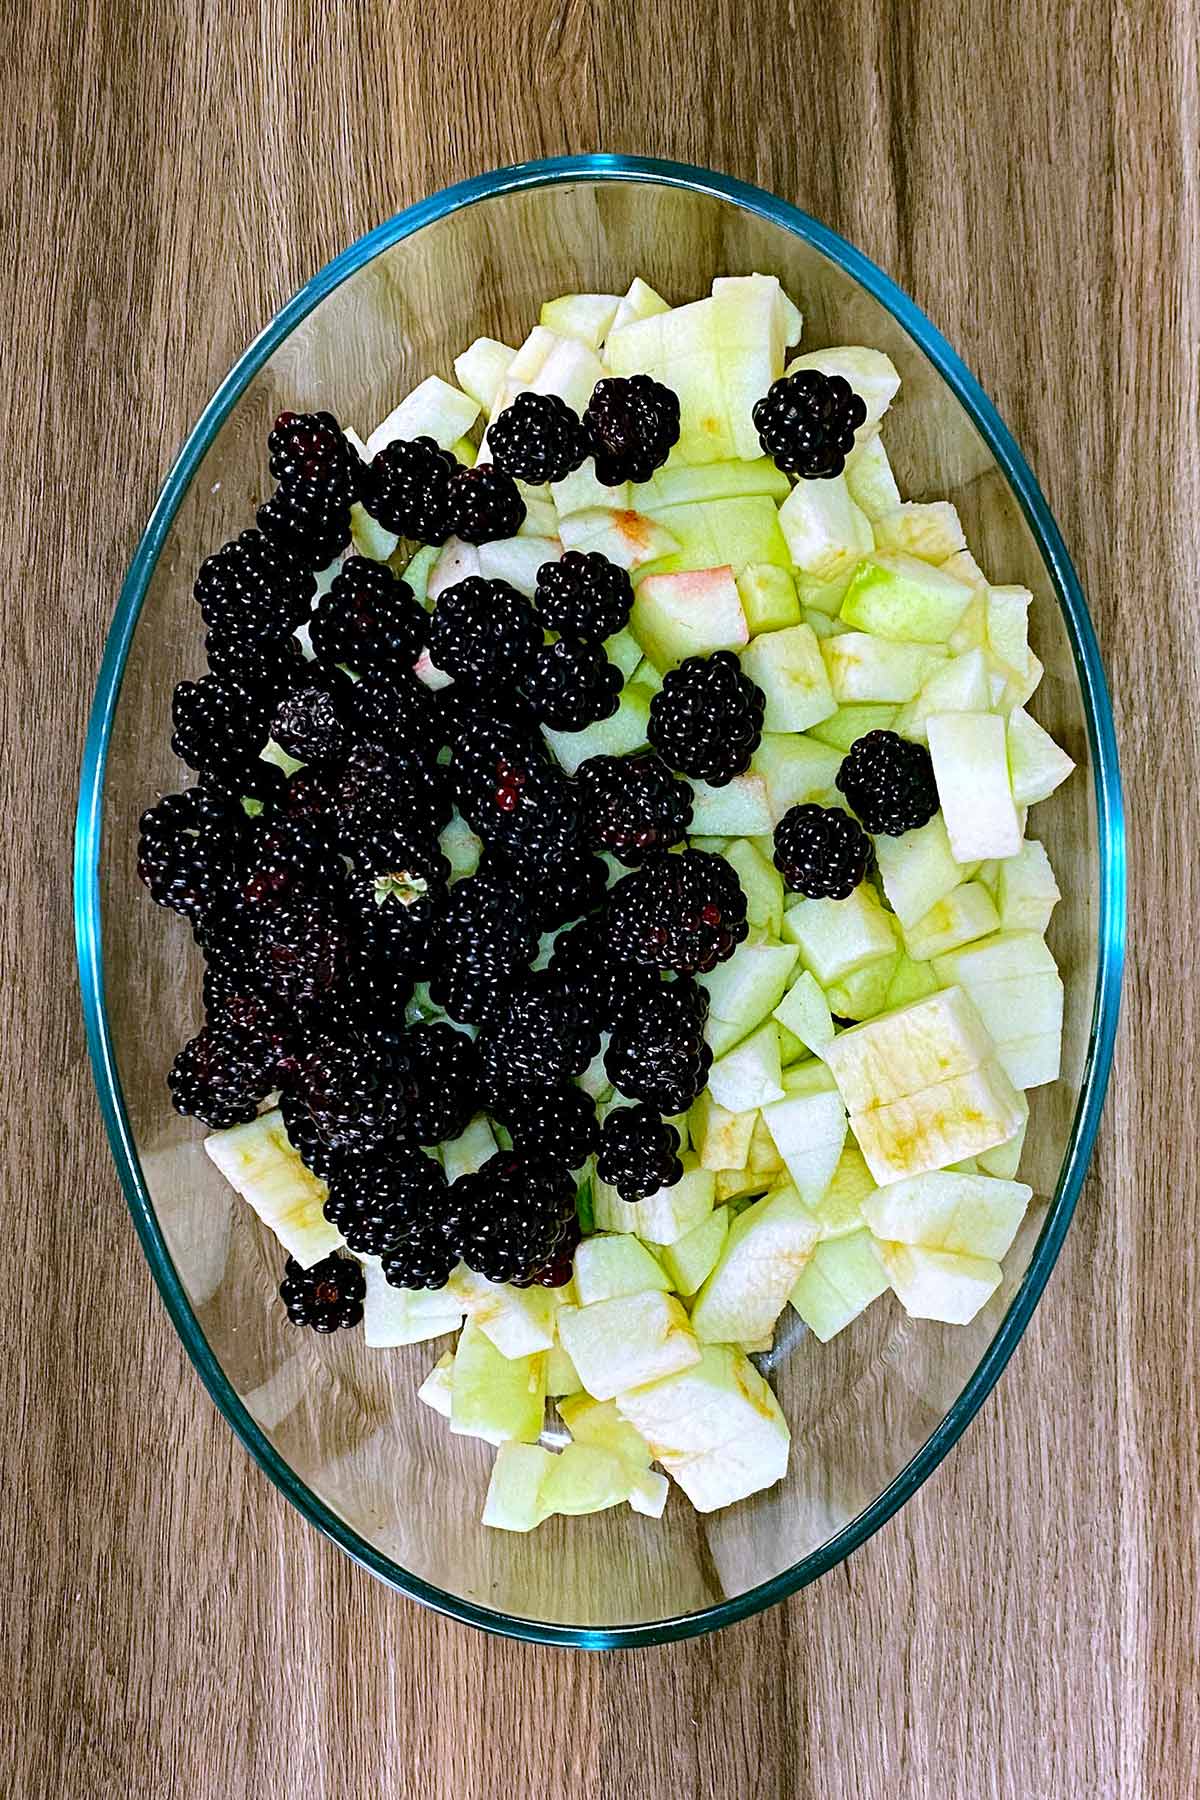 A large glass baking dish full of blackberries and chopped apples.